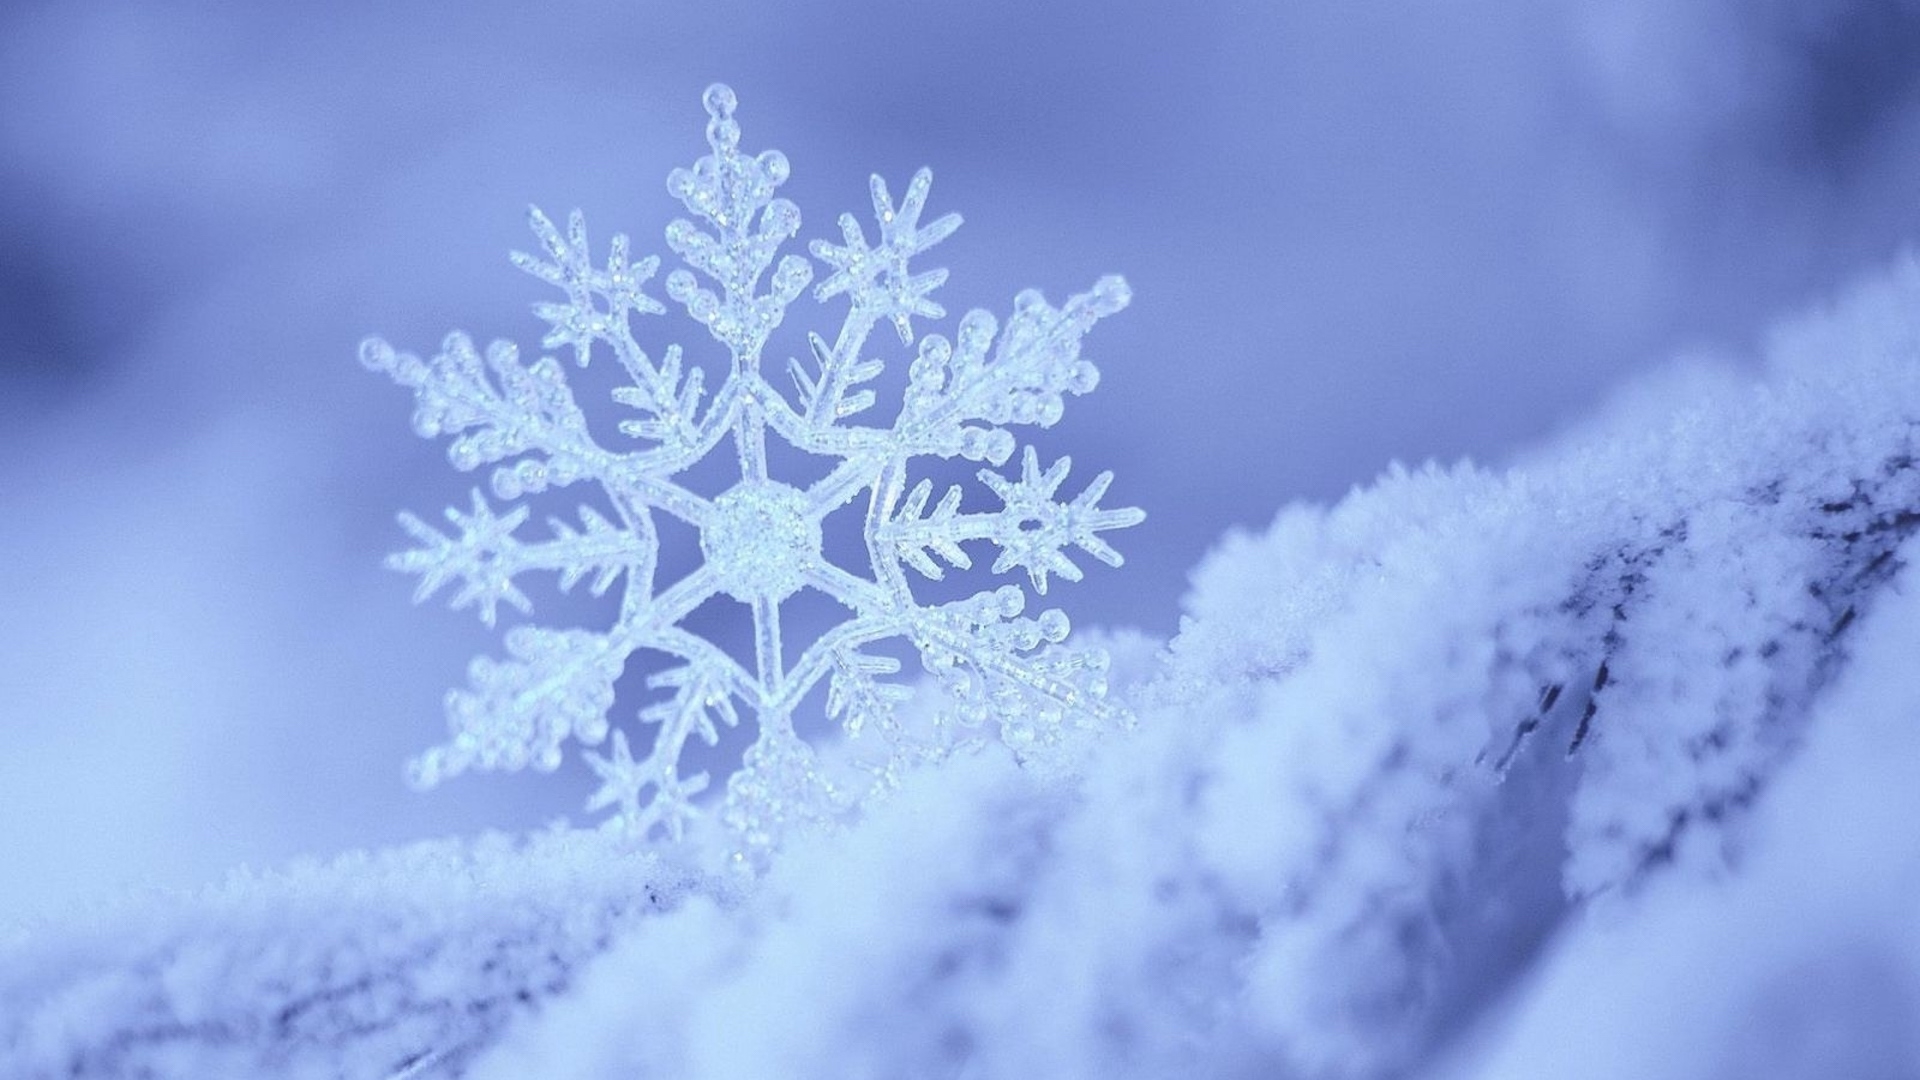 Wallpapers snowflakes winter nature on the desktop